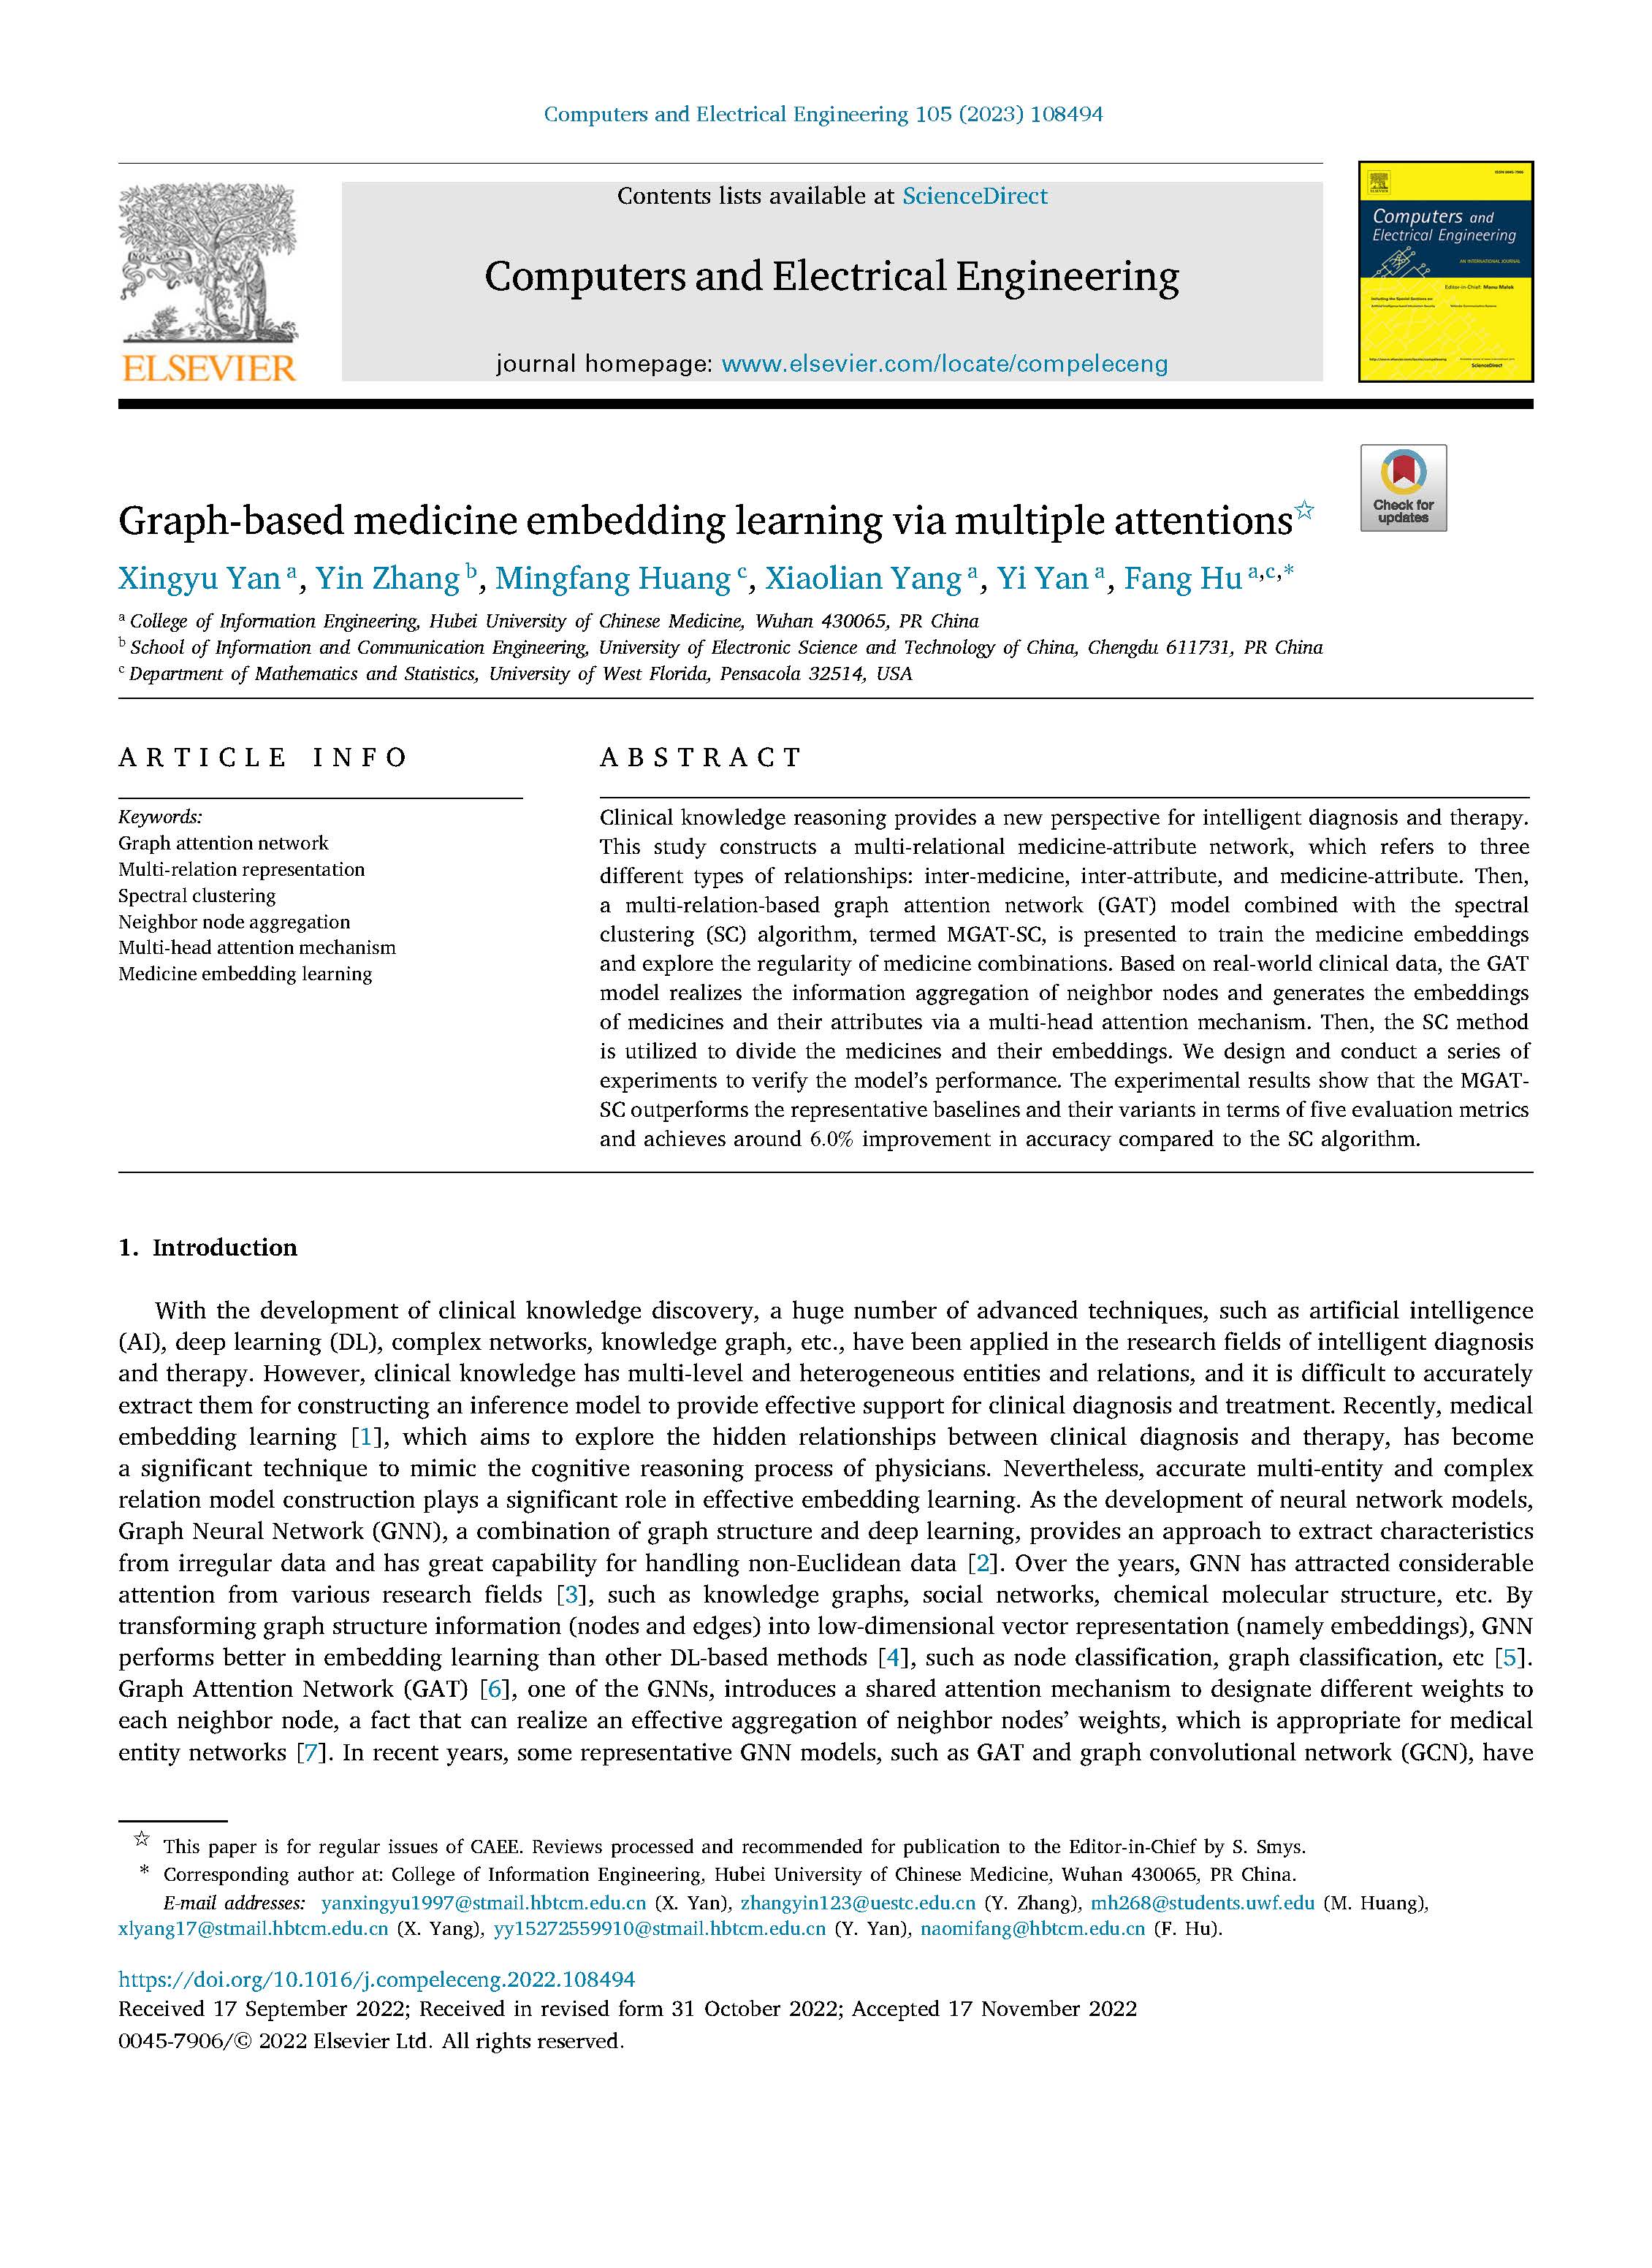 Graph-based medicine embedding learning via multiple attentions (SCI)